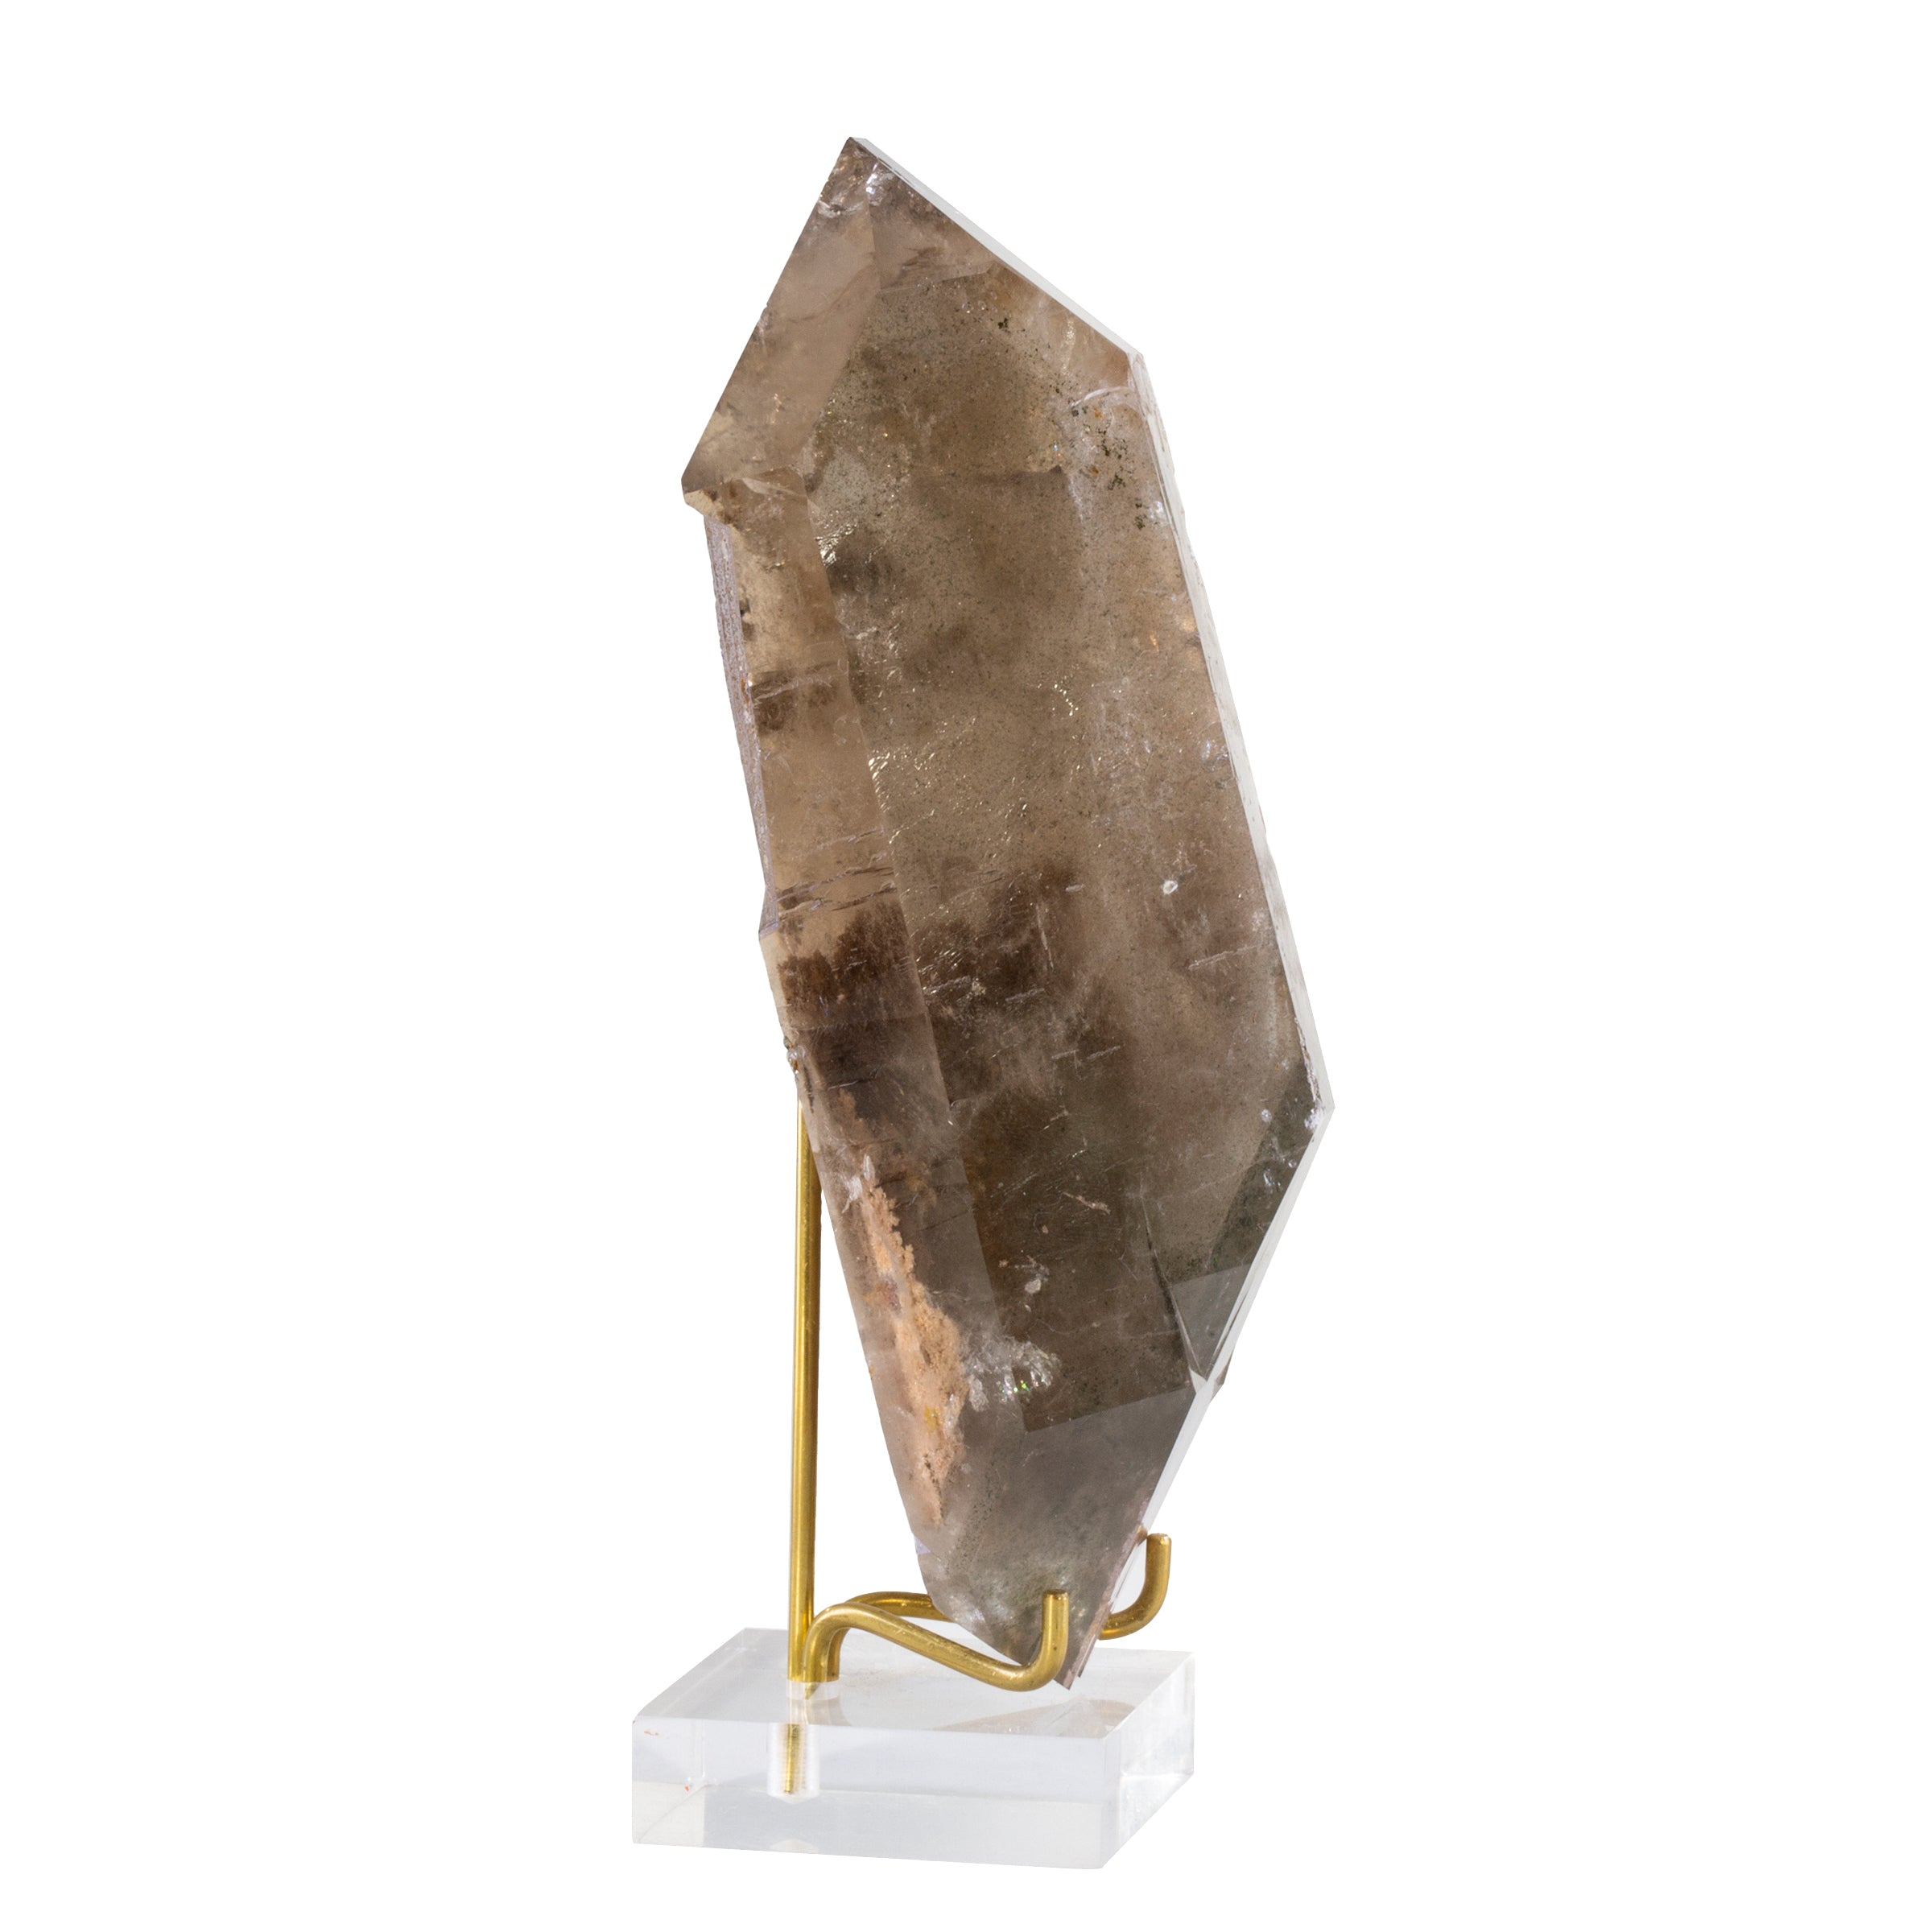 Smoky Quartz with Chlorite 5.5 inch Natural Double Terminated Crystal Point - Brazil - HHX-103 - Crystalarium